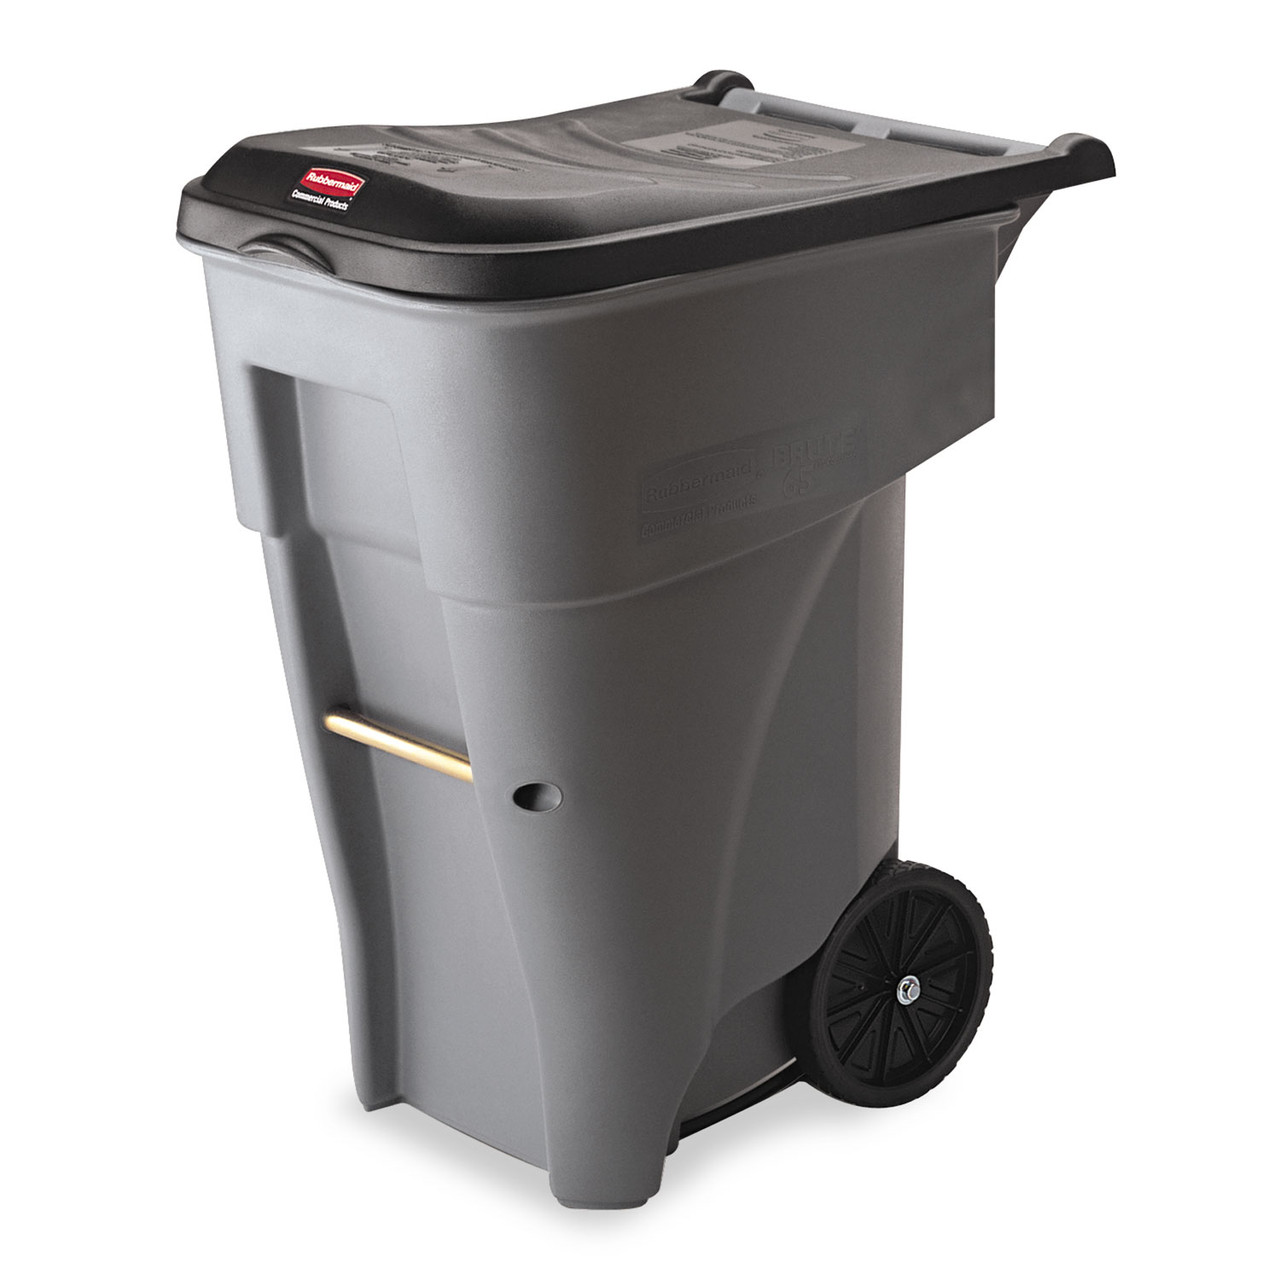 Rubbermaid Commercial Brute Rollout Trash Can, 50 Gallon, Grey